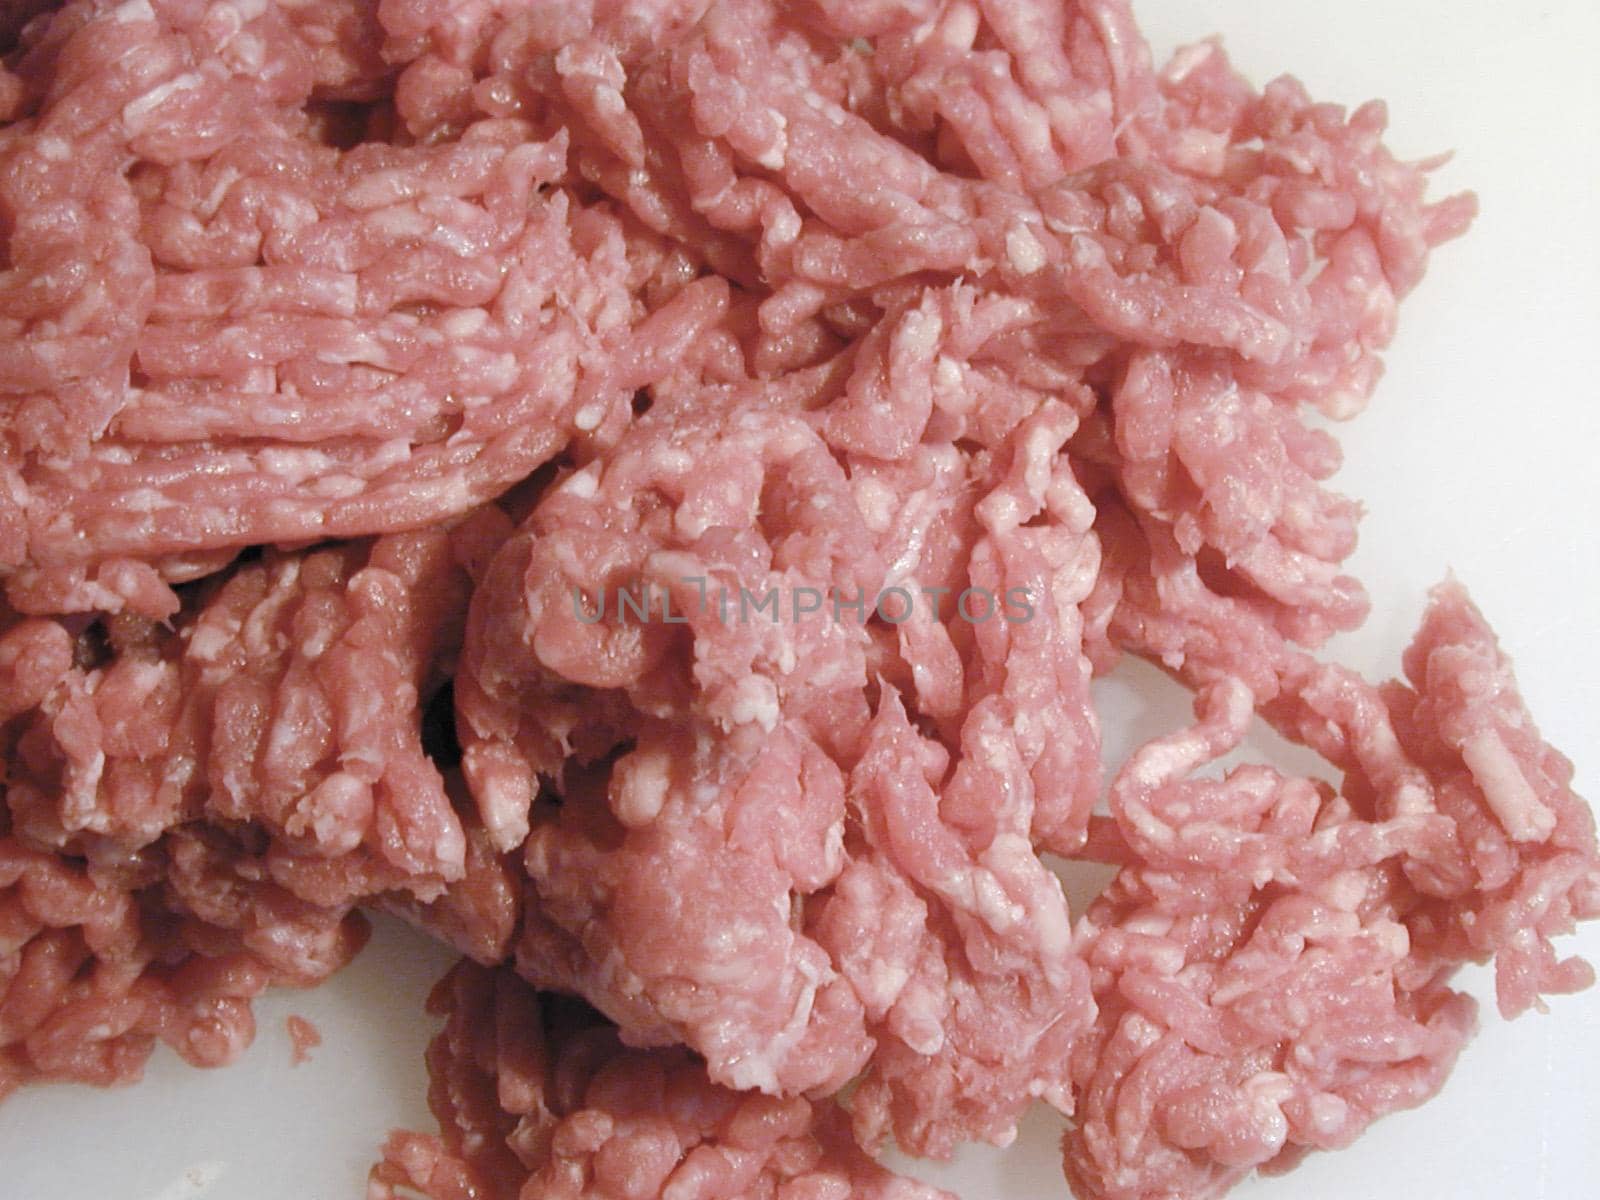 Background texture of raw minced meat by sanisra